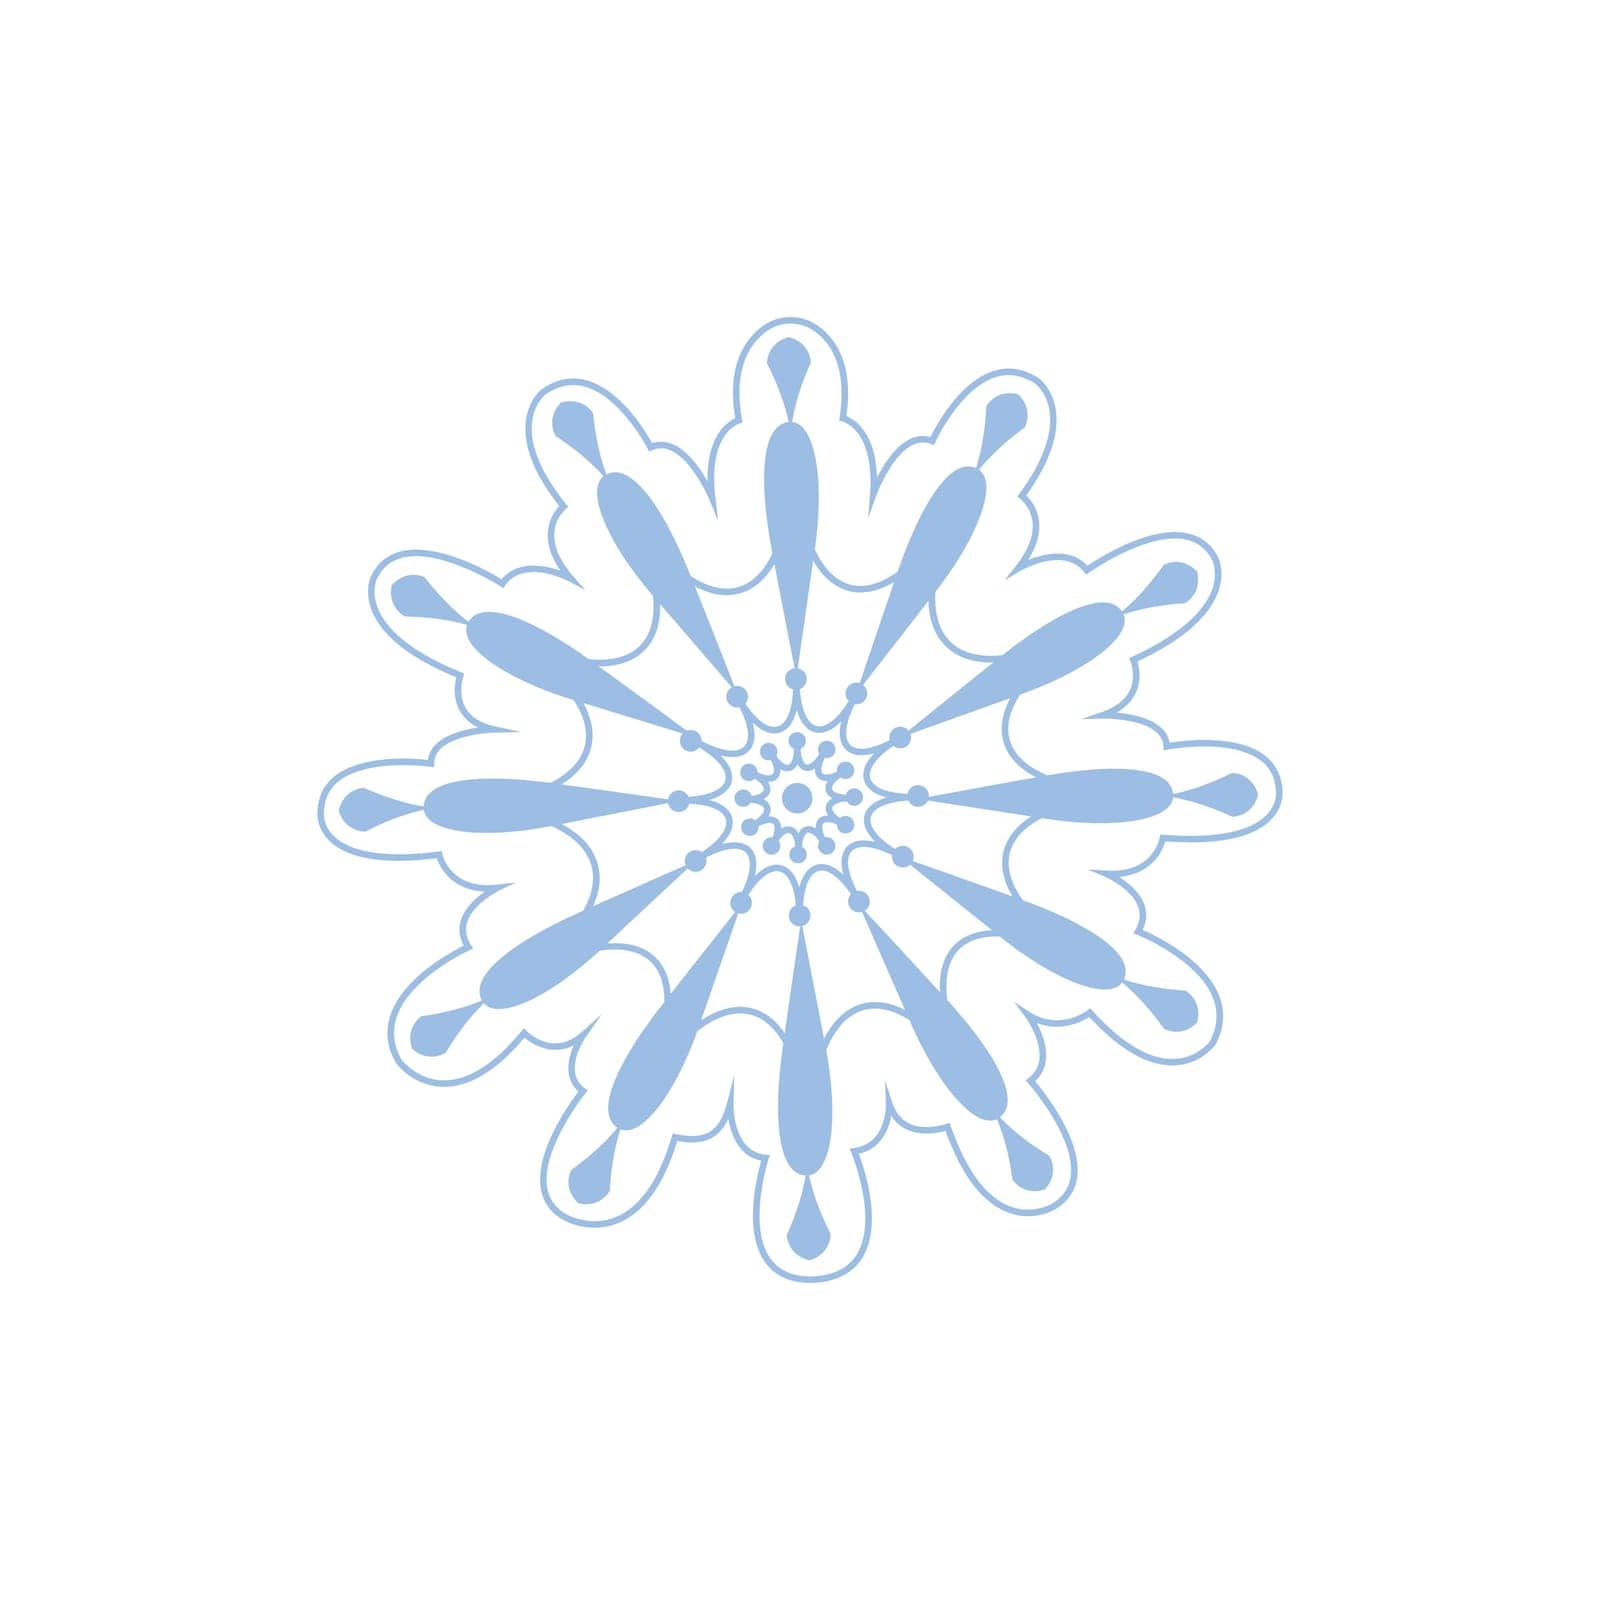 Snowflake. Beautiful snowflake in cartoon style. A white snowflake on a white background. Winter Christmas illustration. Vector.